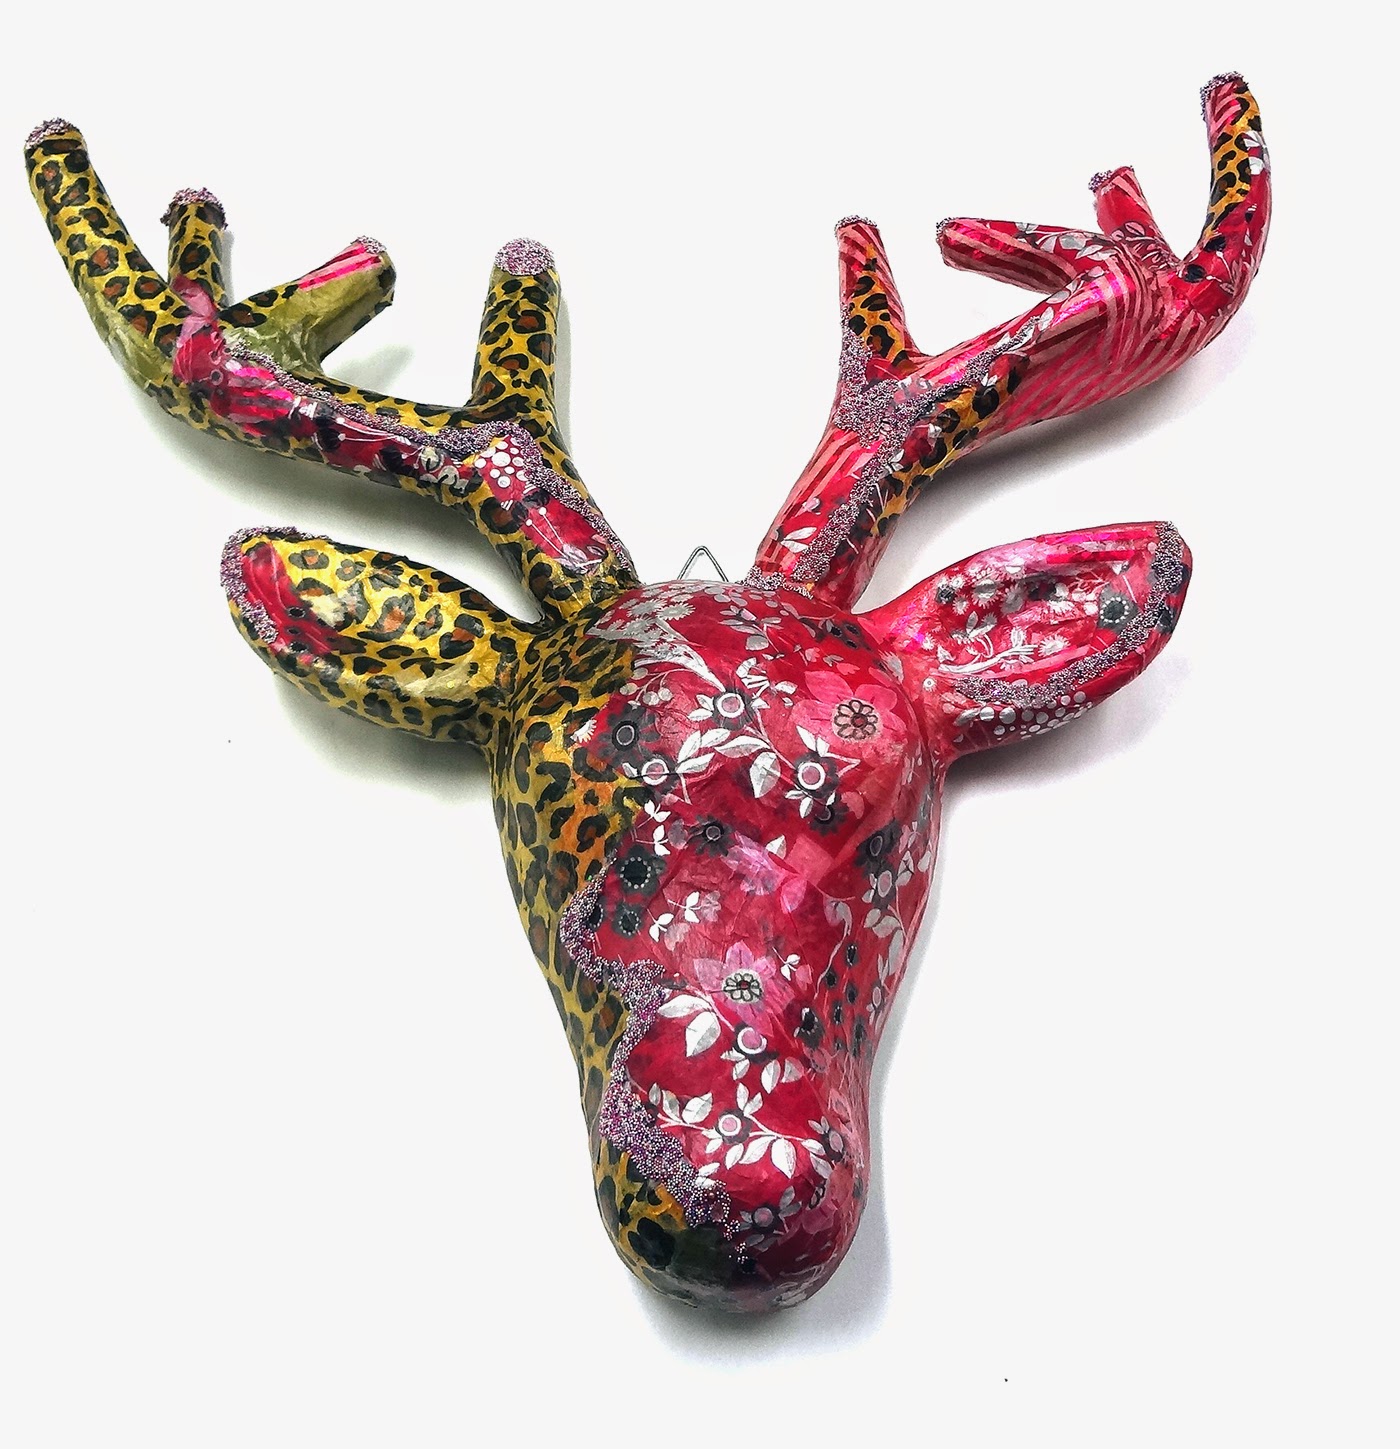 GLITTERED PAPER MACHE DEER DECORATIONS Mad in Crafts